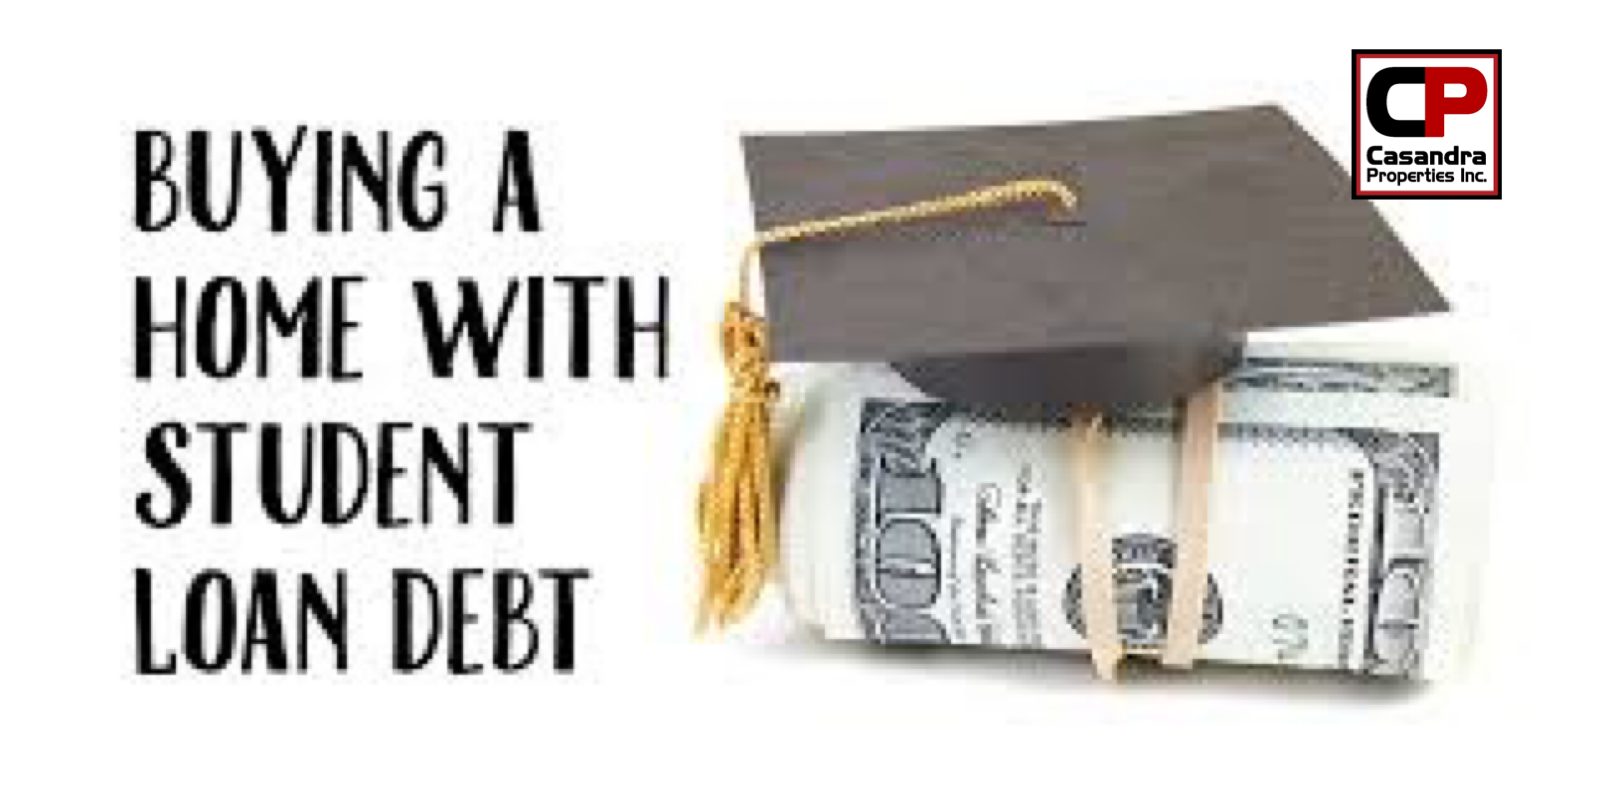 Buying a home with Student Debt loan